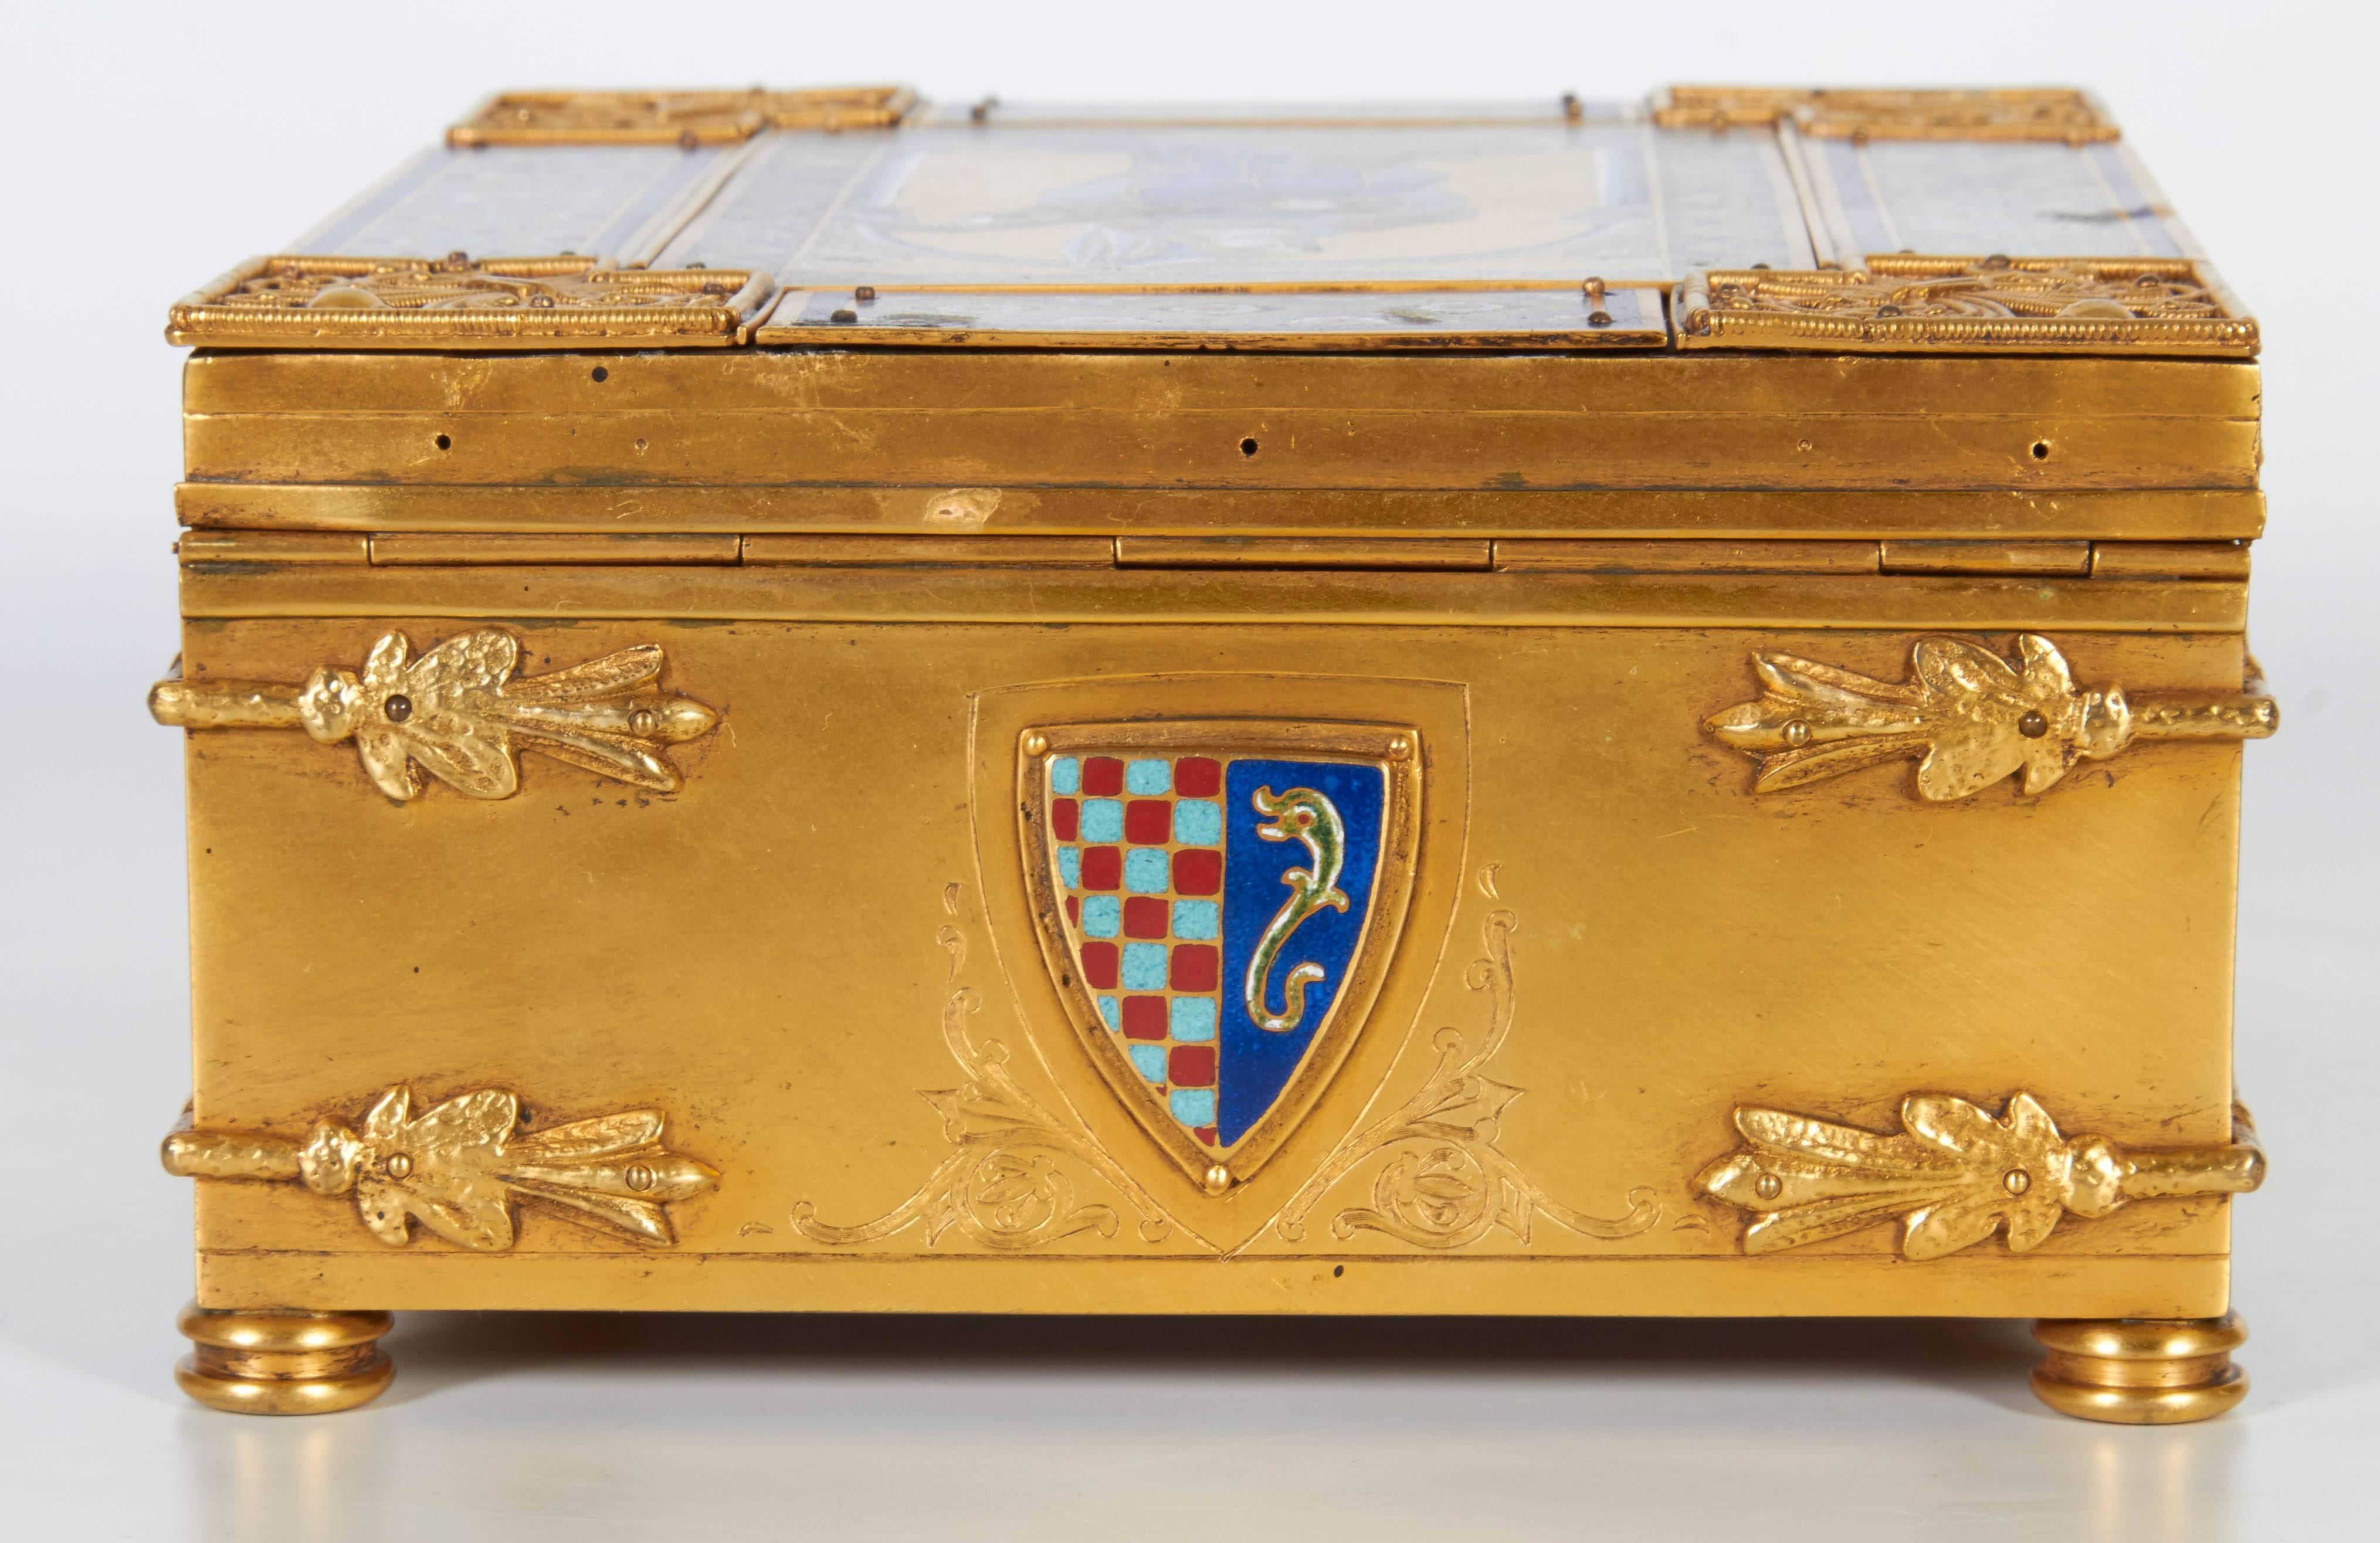 Early 20th Century American Bronze and Enameled Box/Humidor by E.F. Caldwell, New York, 1900s For Sale